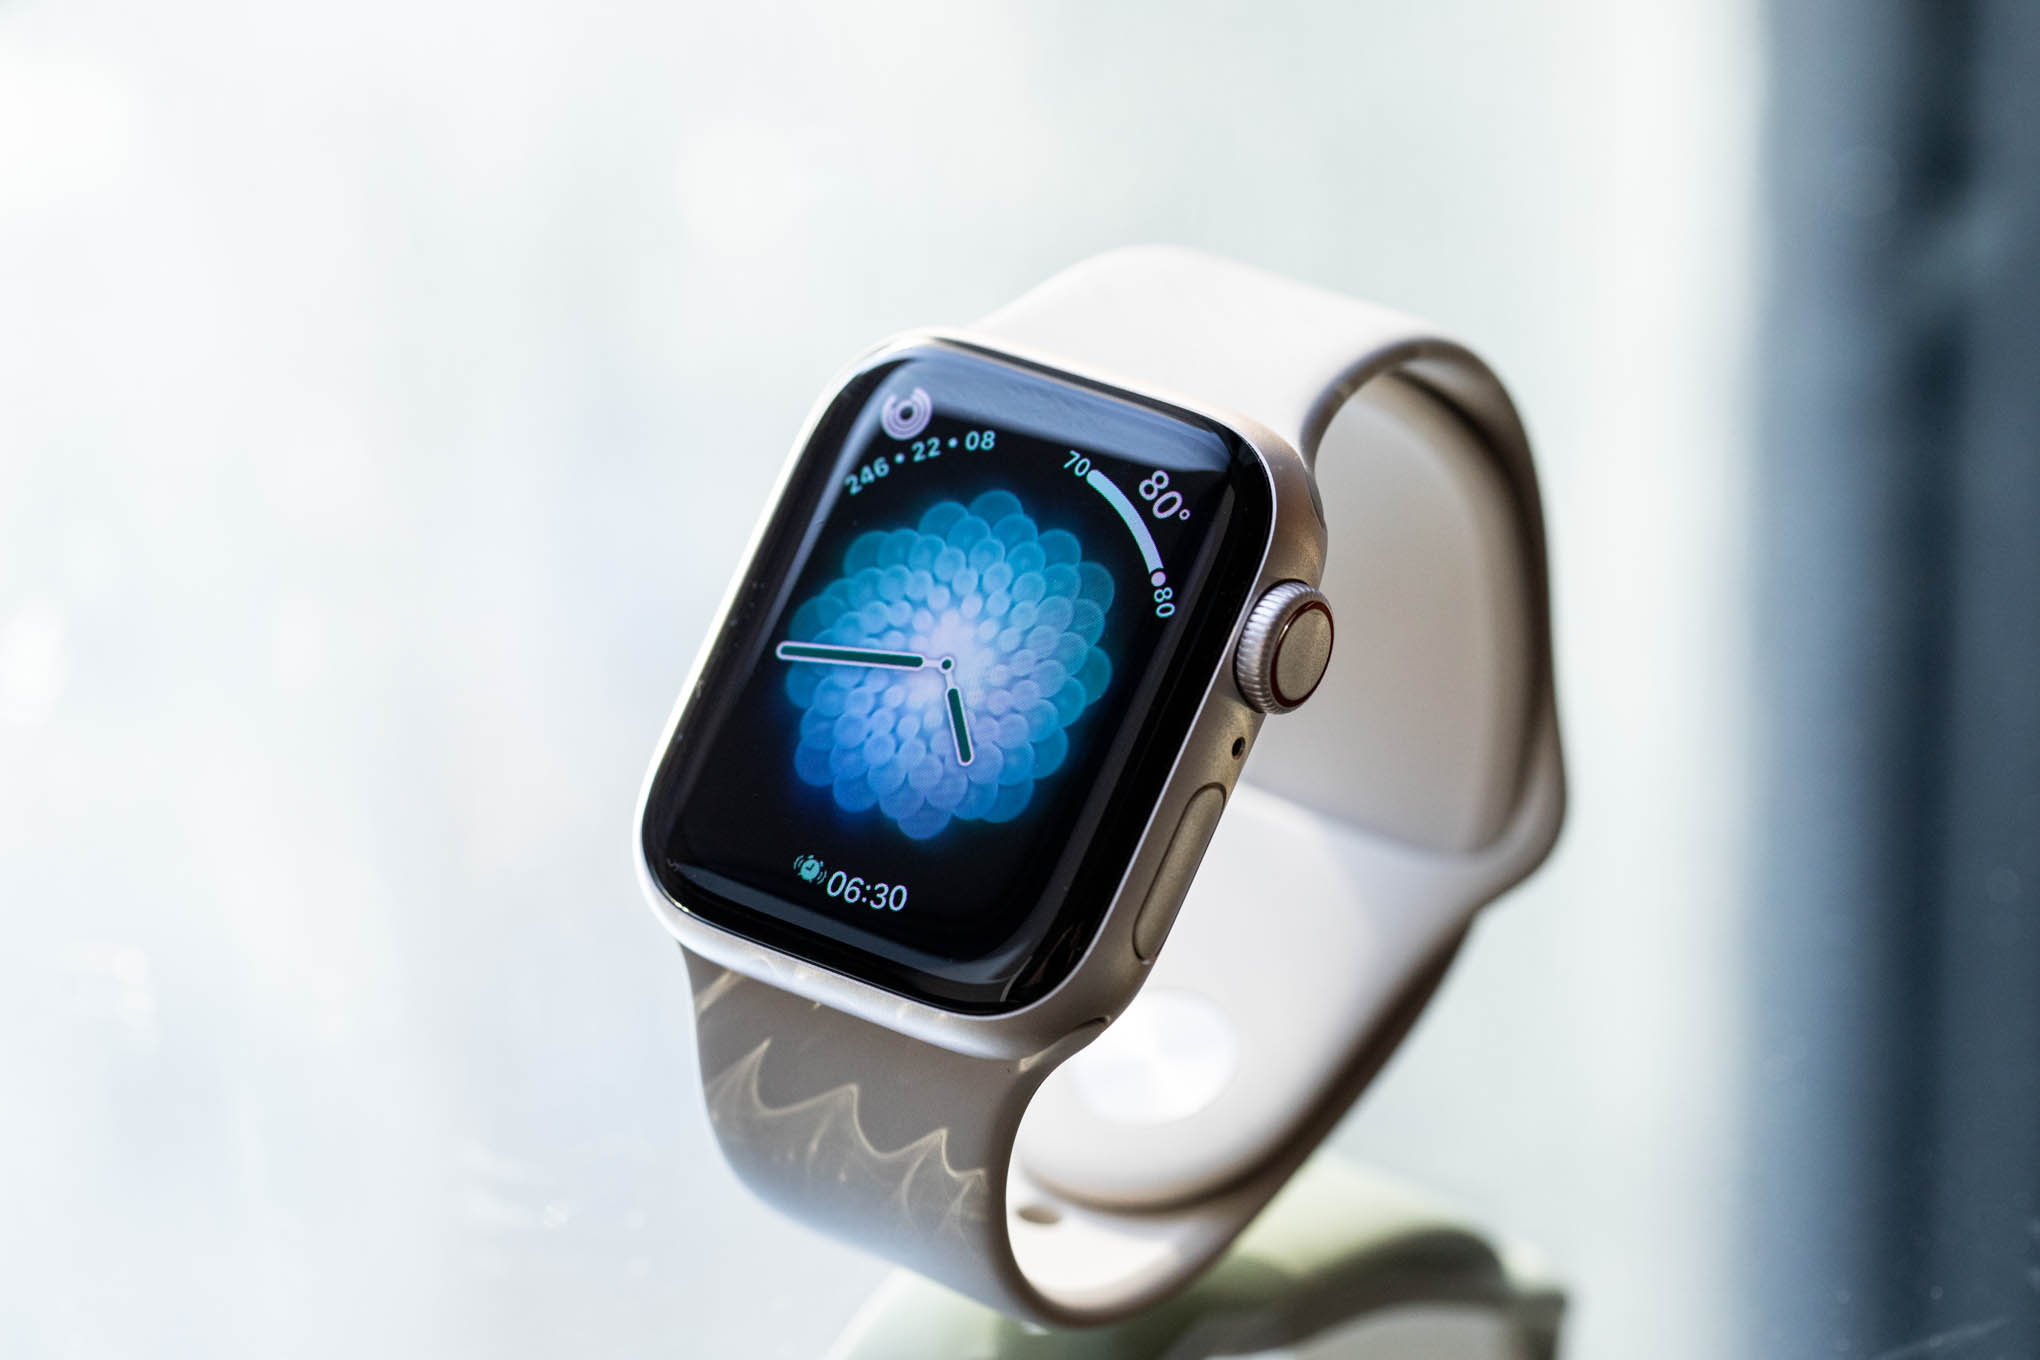 Apple Watch with Breathe watchface, which has a black border